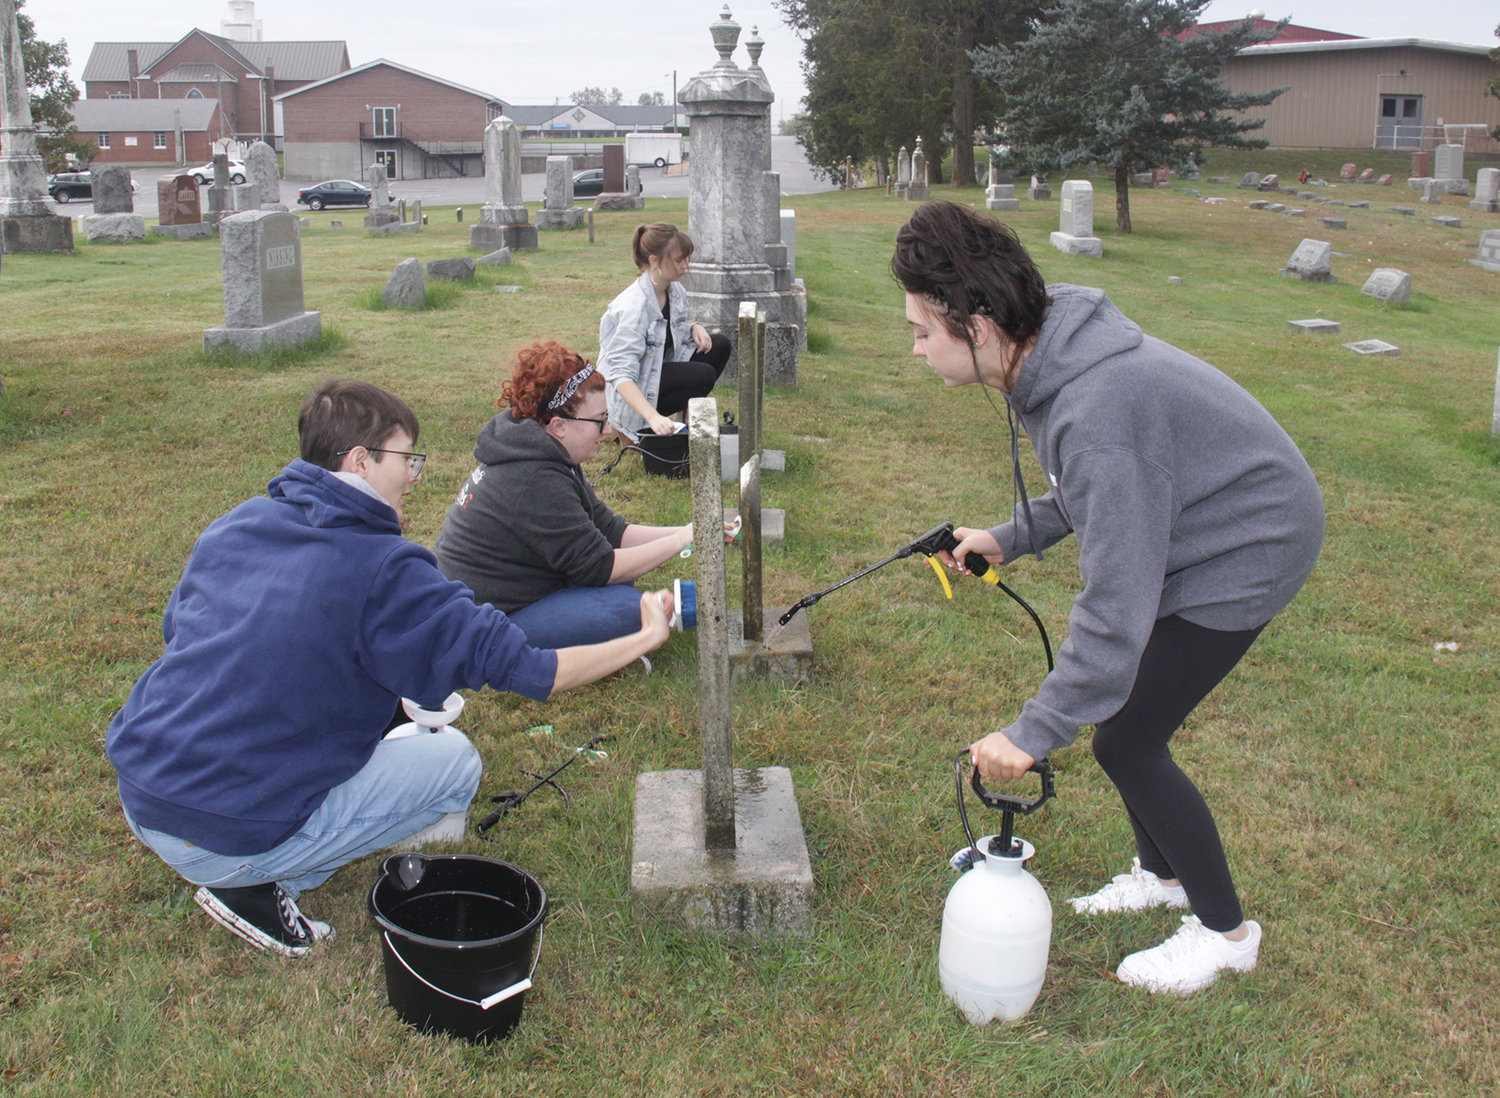 CARING FOR THE FORGOTTEN — Members of the Wright City High School Student Council helped clean some of the oldest grave stones in the Wright City Cemetery on Saturday, Oct. 23. Many of the graves no longer have living families to care for them. Pictured, from left to right, are Jeronimo Lesmes, faculty sponsor Whitney Schuenemeyer, Payton Mosbey, and Lily Lamb. Other students came and went throughout the day.